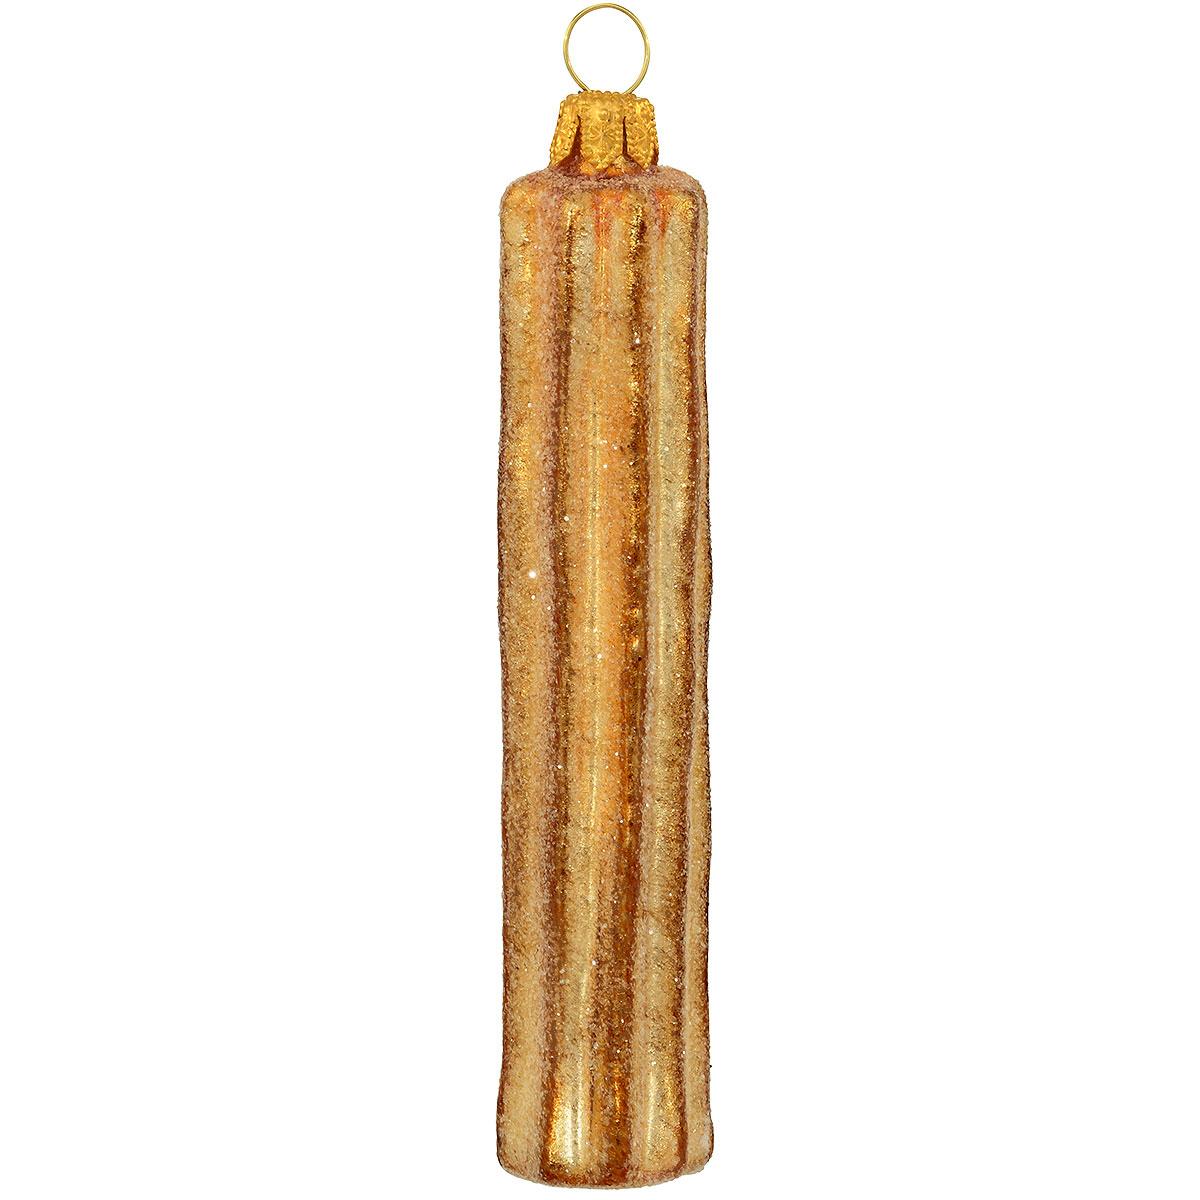 Churro Fried Pastry Glass Ornament